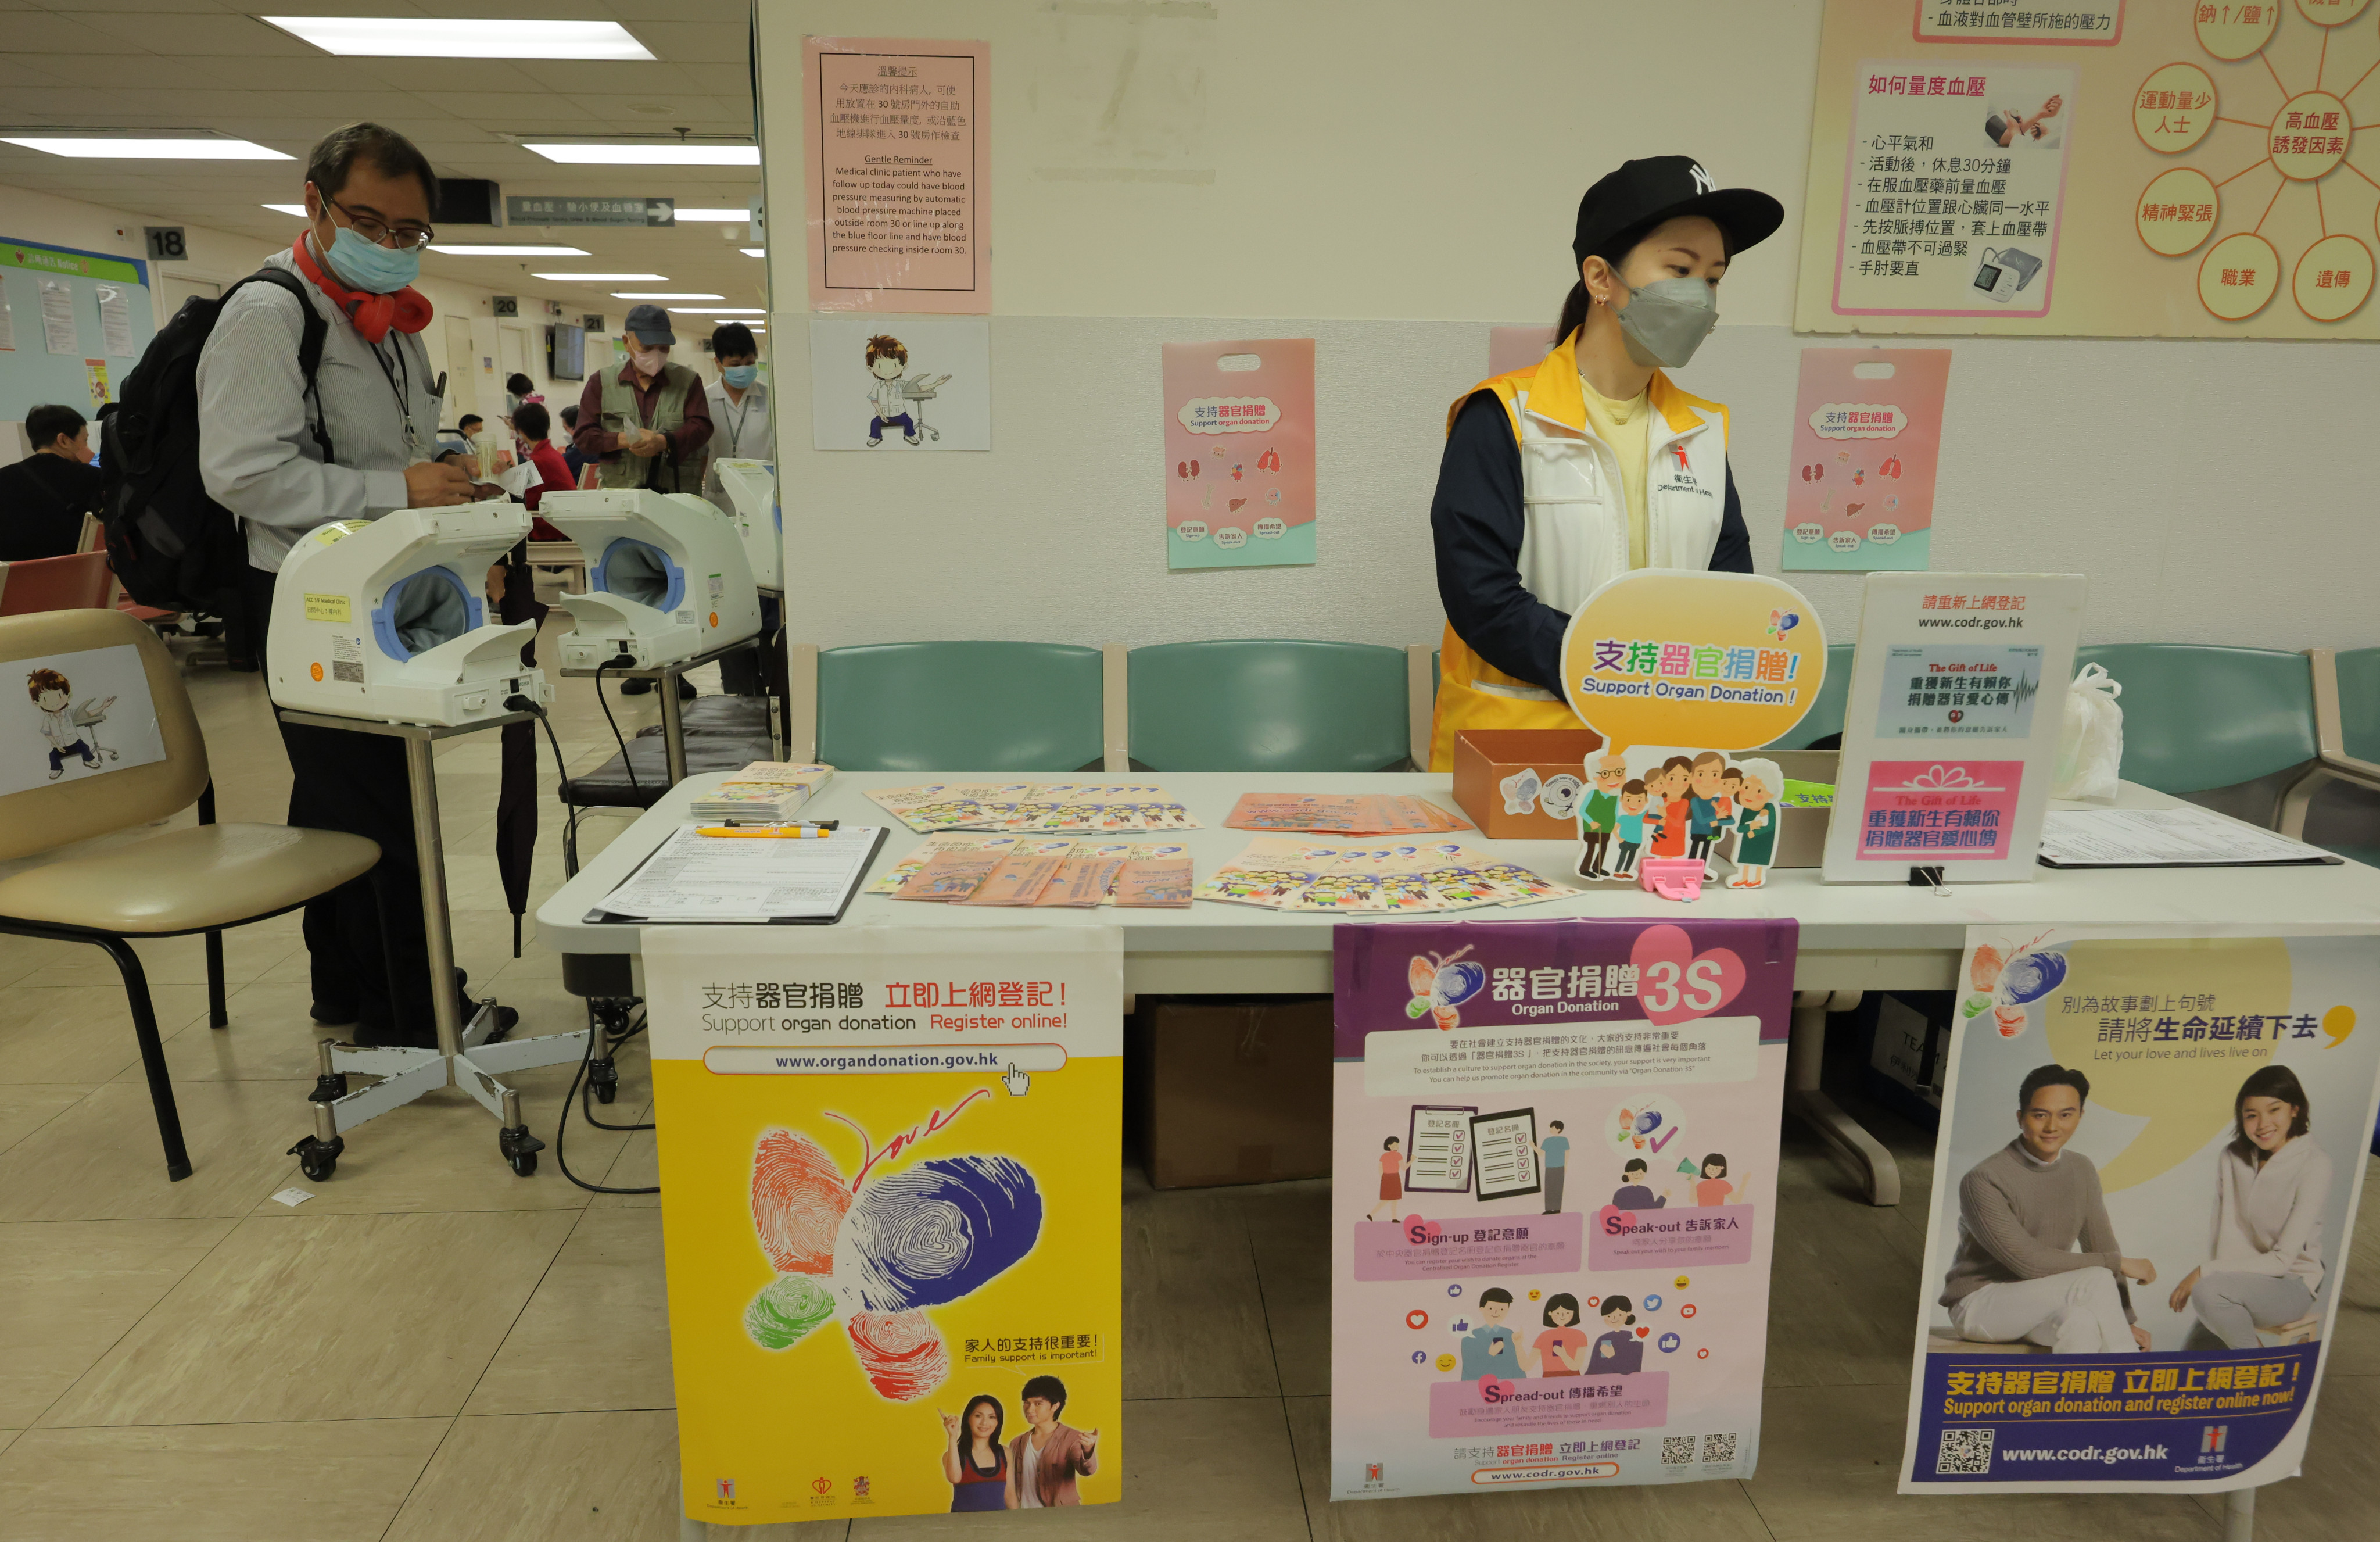 An organ donation promotion booth at Queen Elizabeth Hospital. Hong Kong has one of the lowest rates of organ donation in the world. Photo: SCMP